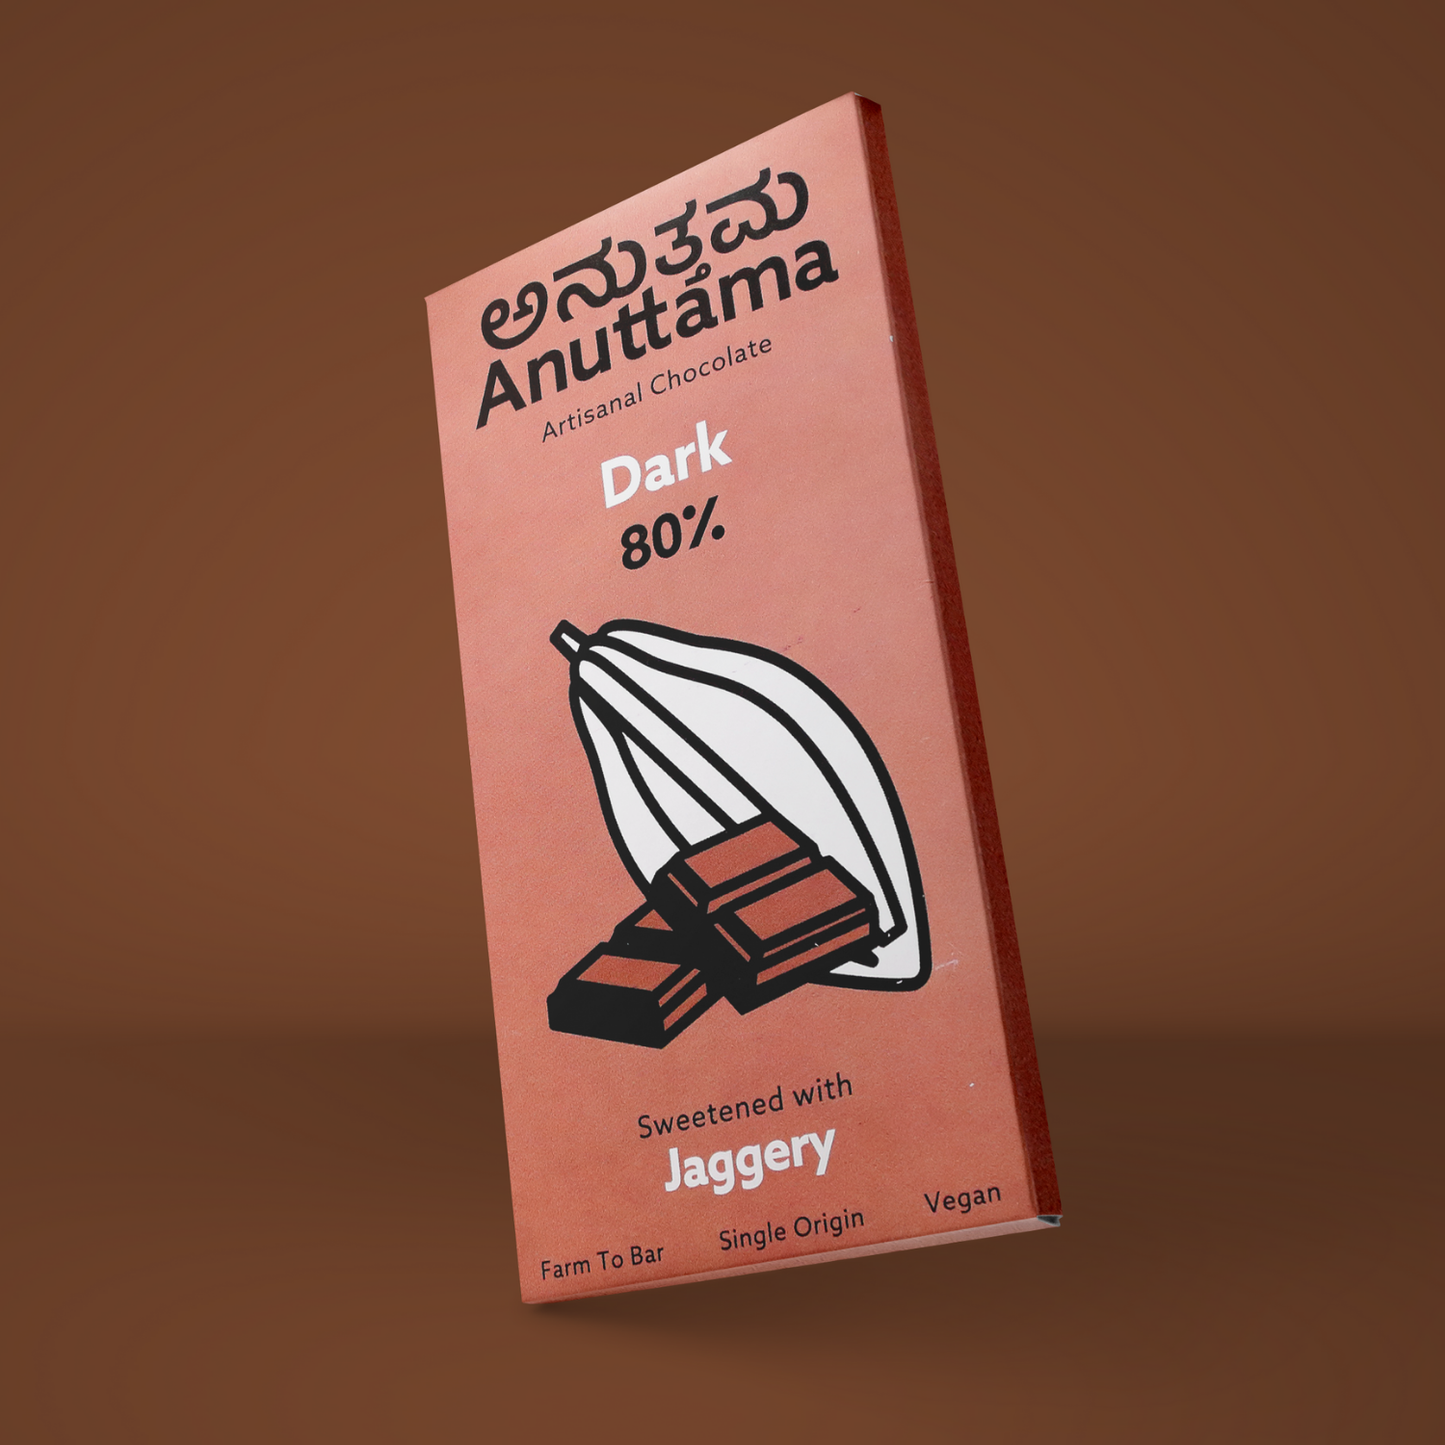 ANUTTAMA Dark Chocolate | 80% Cocoa | Natural Jaggery Sweetened | Dark Chocolate Bar | No Artificial Flavours and Colors | Natural Chocolate Bar ( 50g Pack of 1)